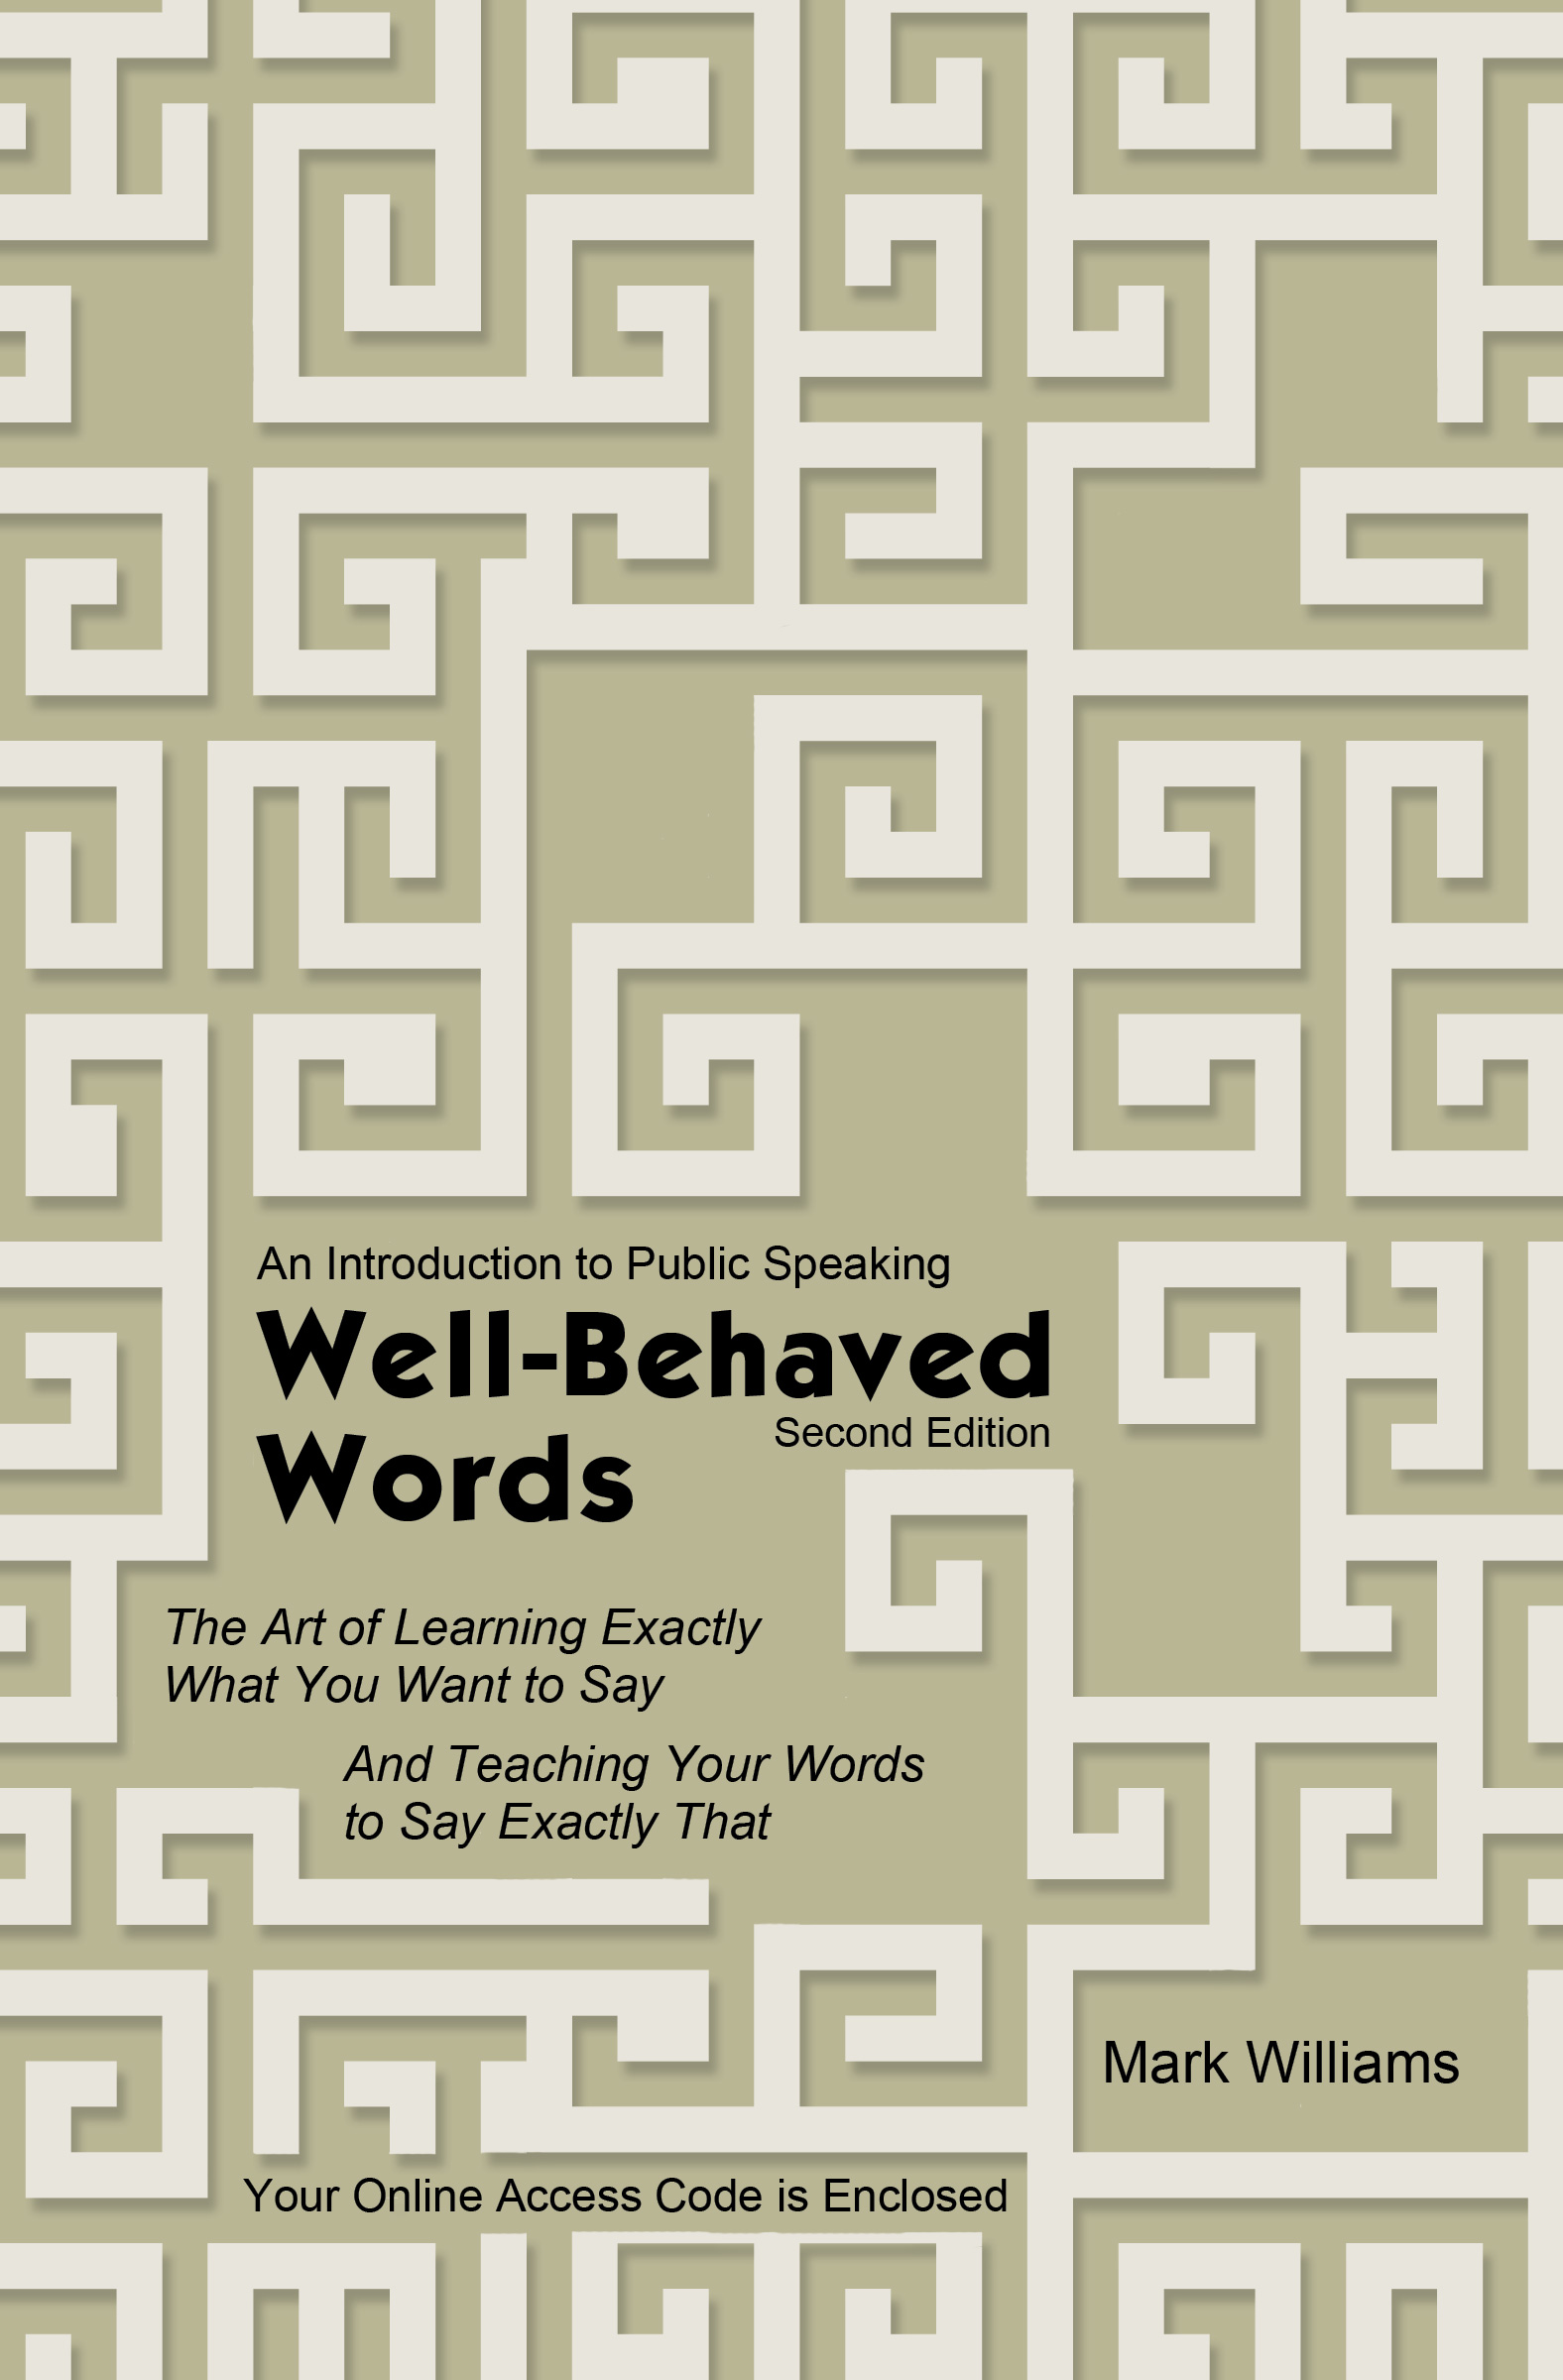 Product Details - Well-Behaved Words: The Art of Learning Exactly